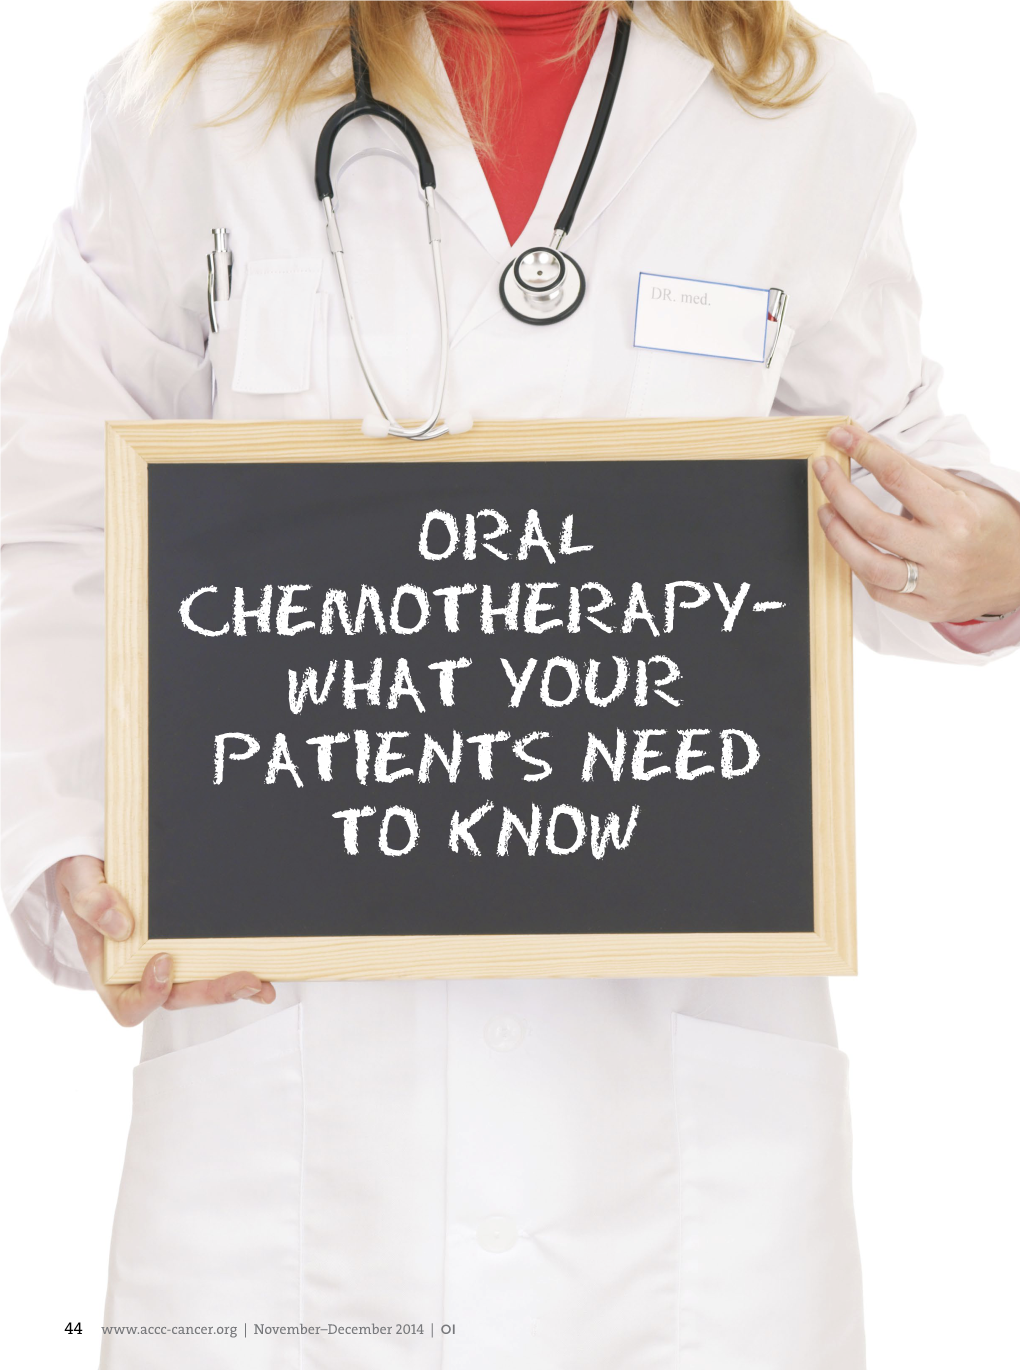 Oral Chemotherapy– What Your Patients Need to Know